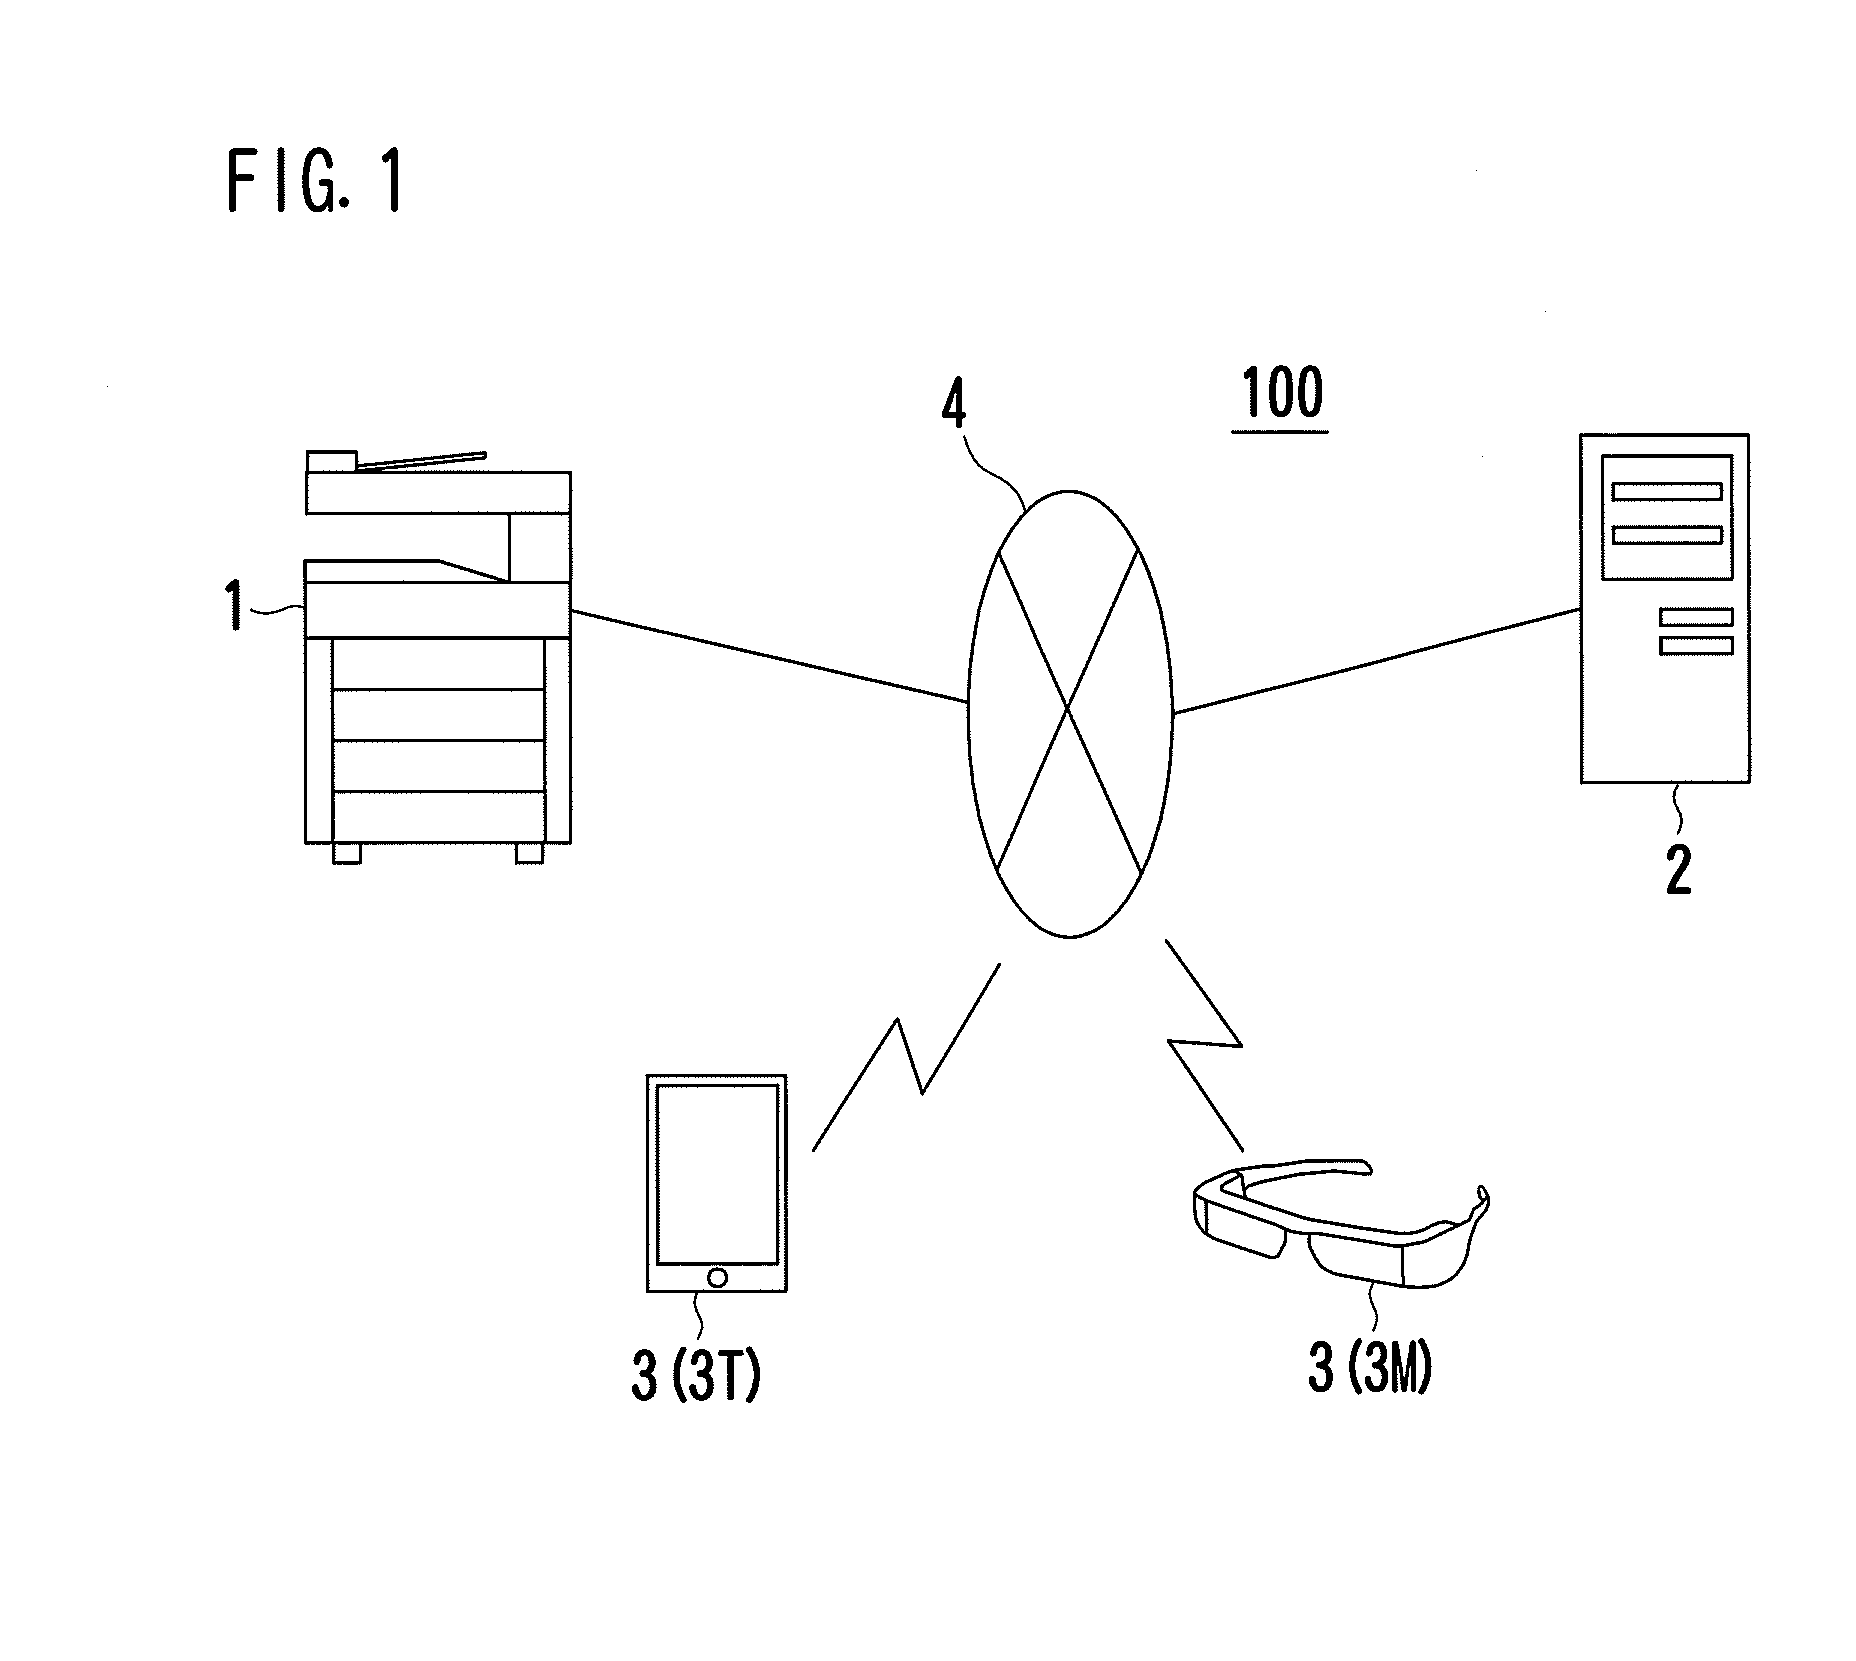 Image processing system, image processing apparatus, and image forming apparatus